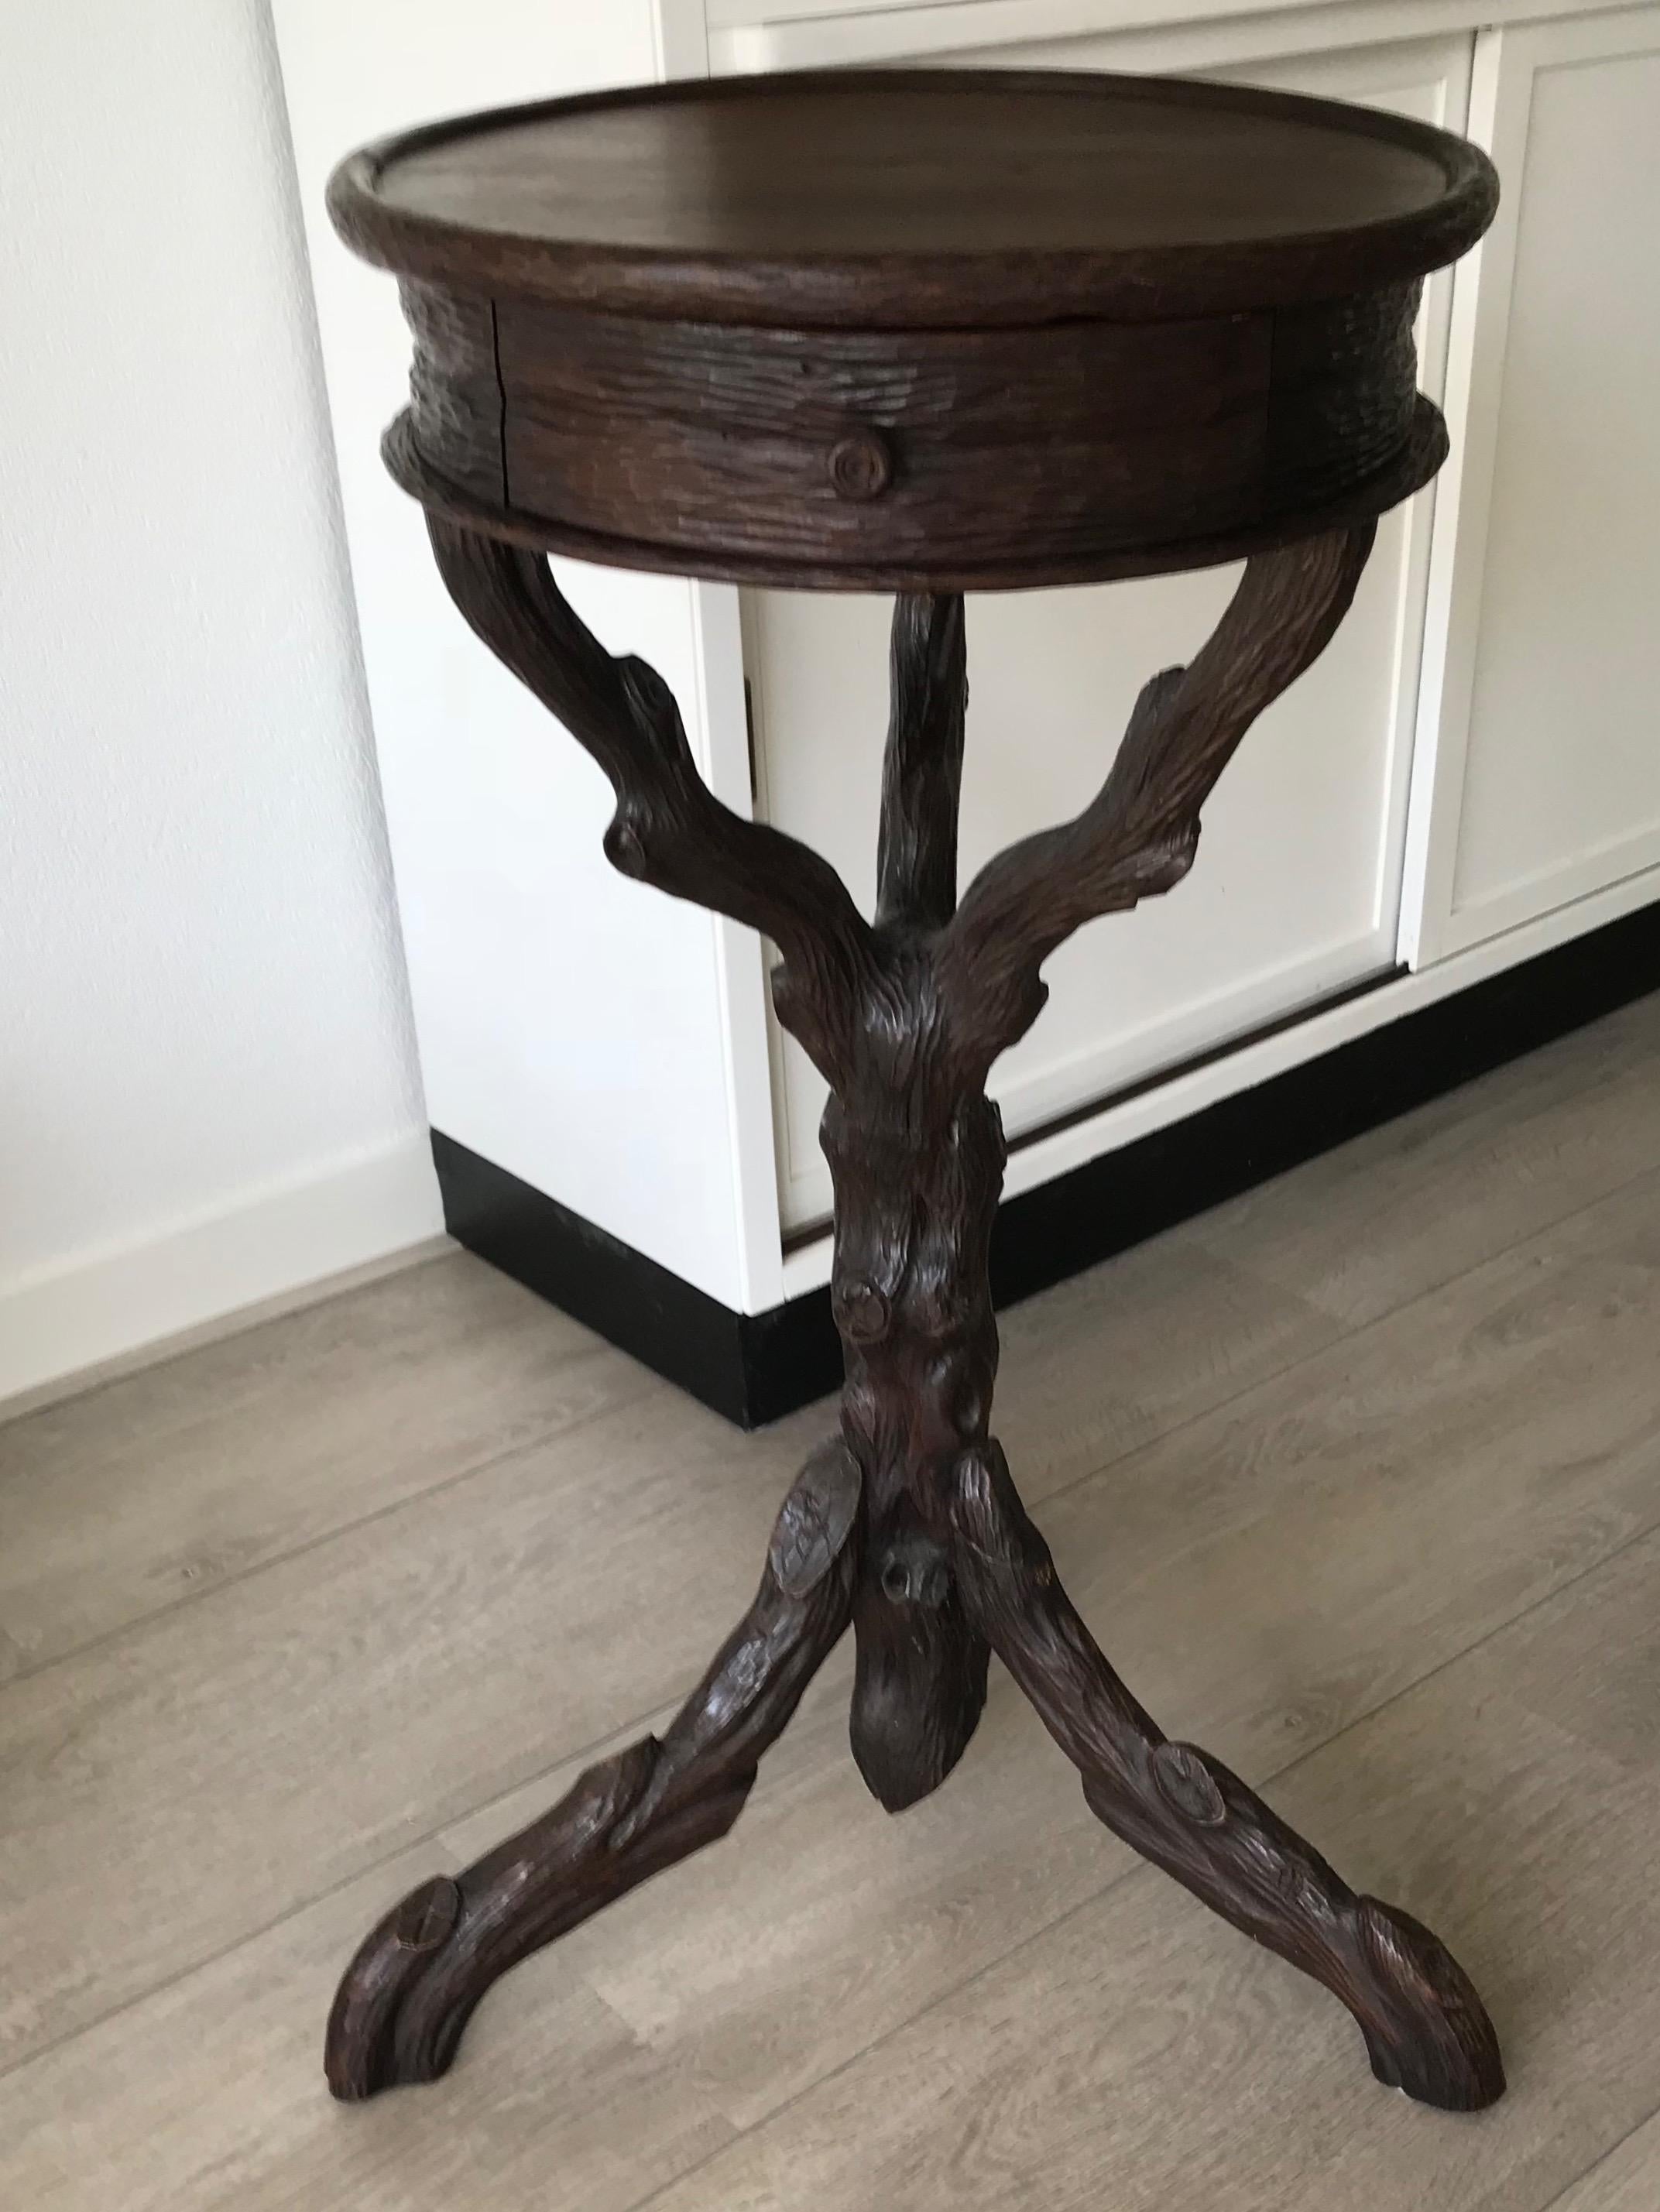 Unique and impressive table by Horrix, from circa 1870. 

If you are a collector of rare, stylish and functional Black Forest pieces then this excellent condition table could be the perfect addition to your collection and/or interior. This unique